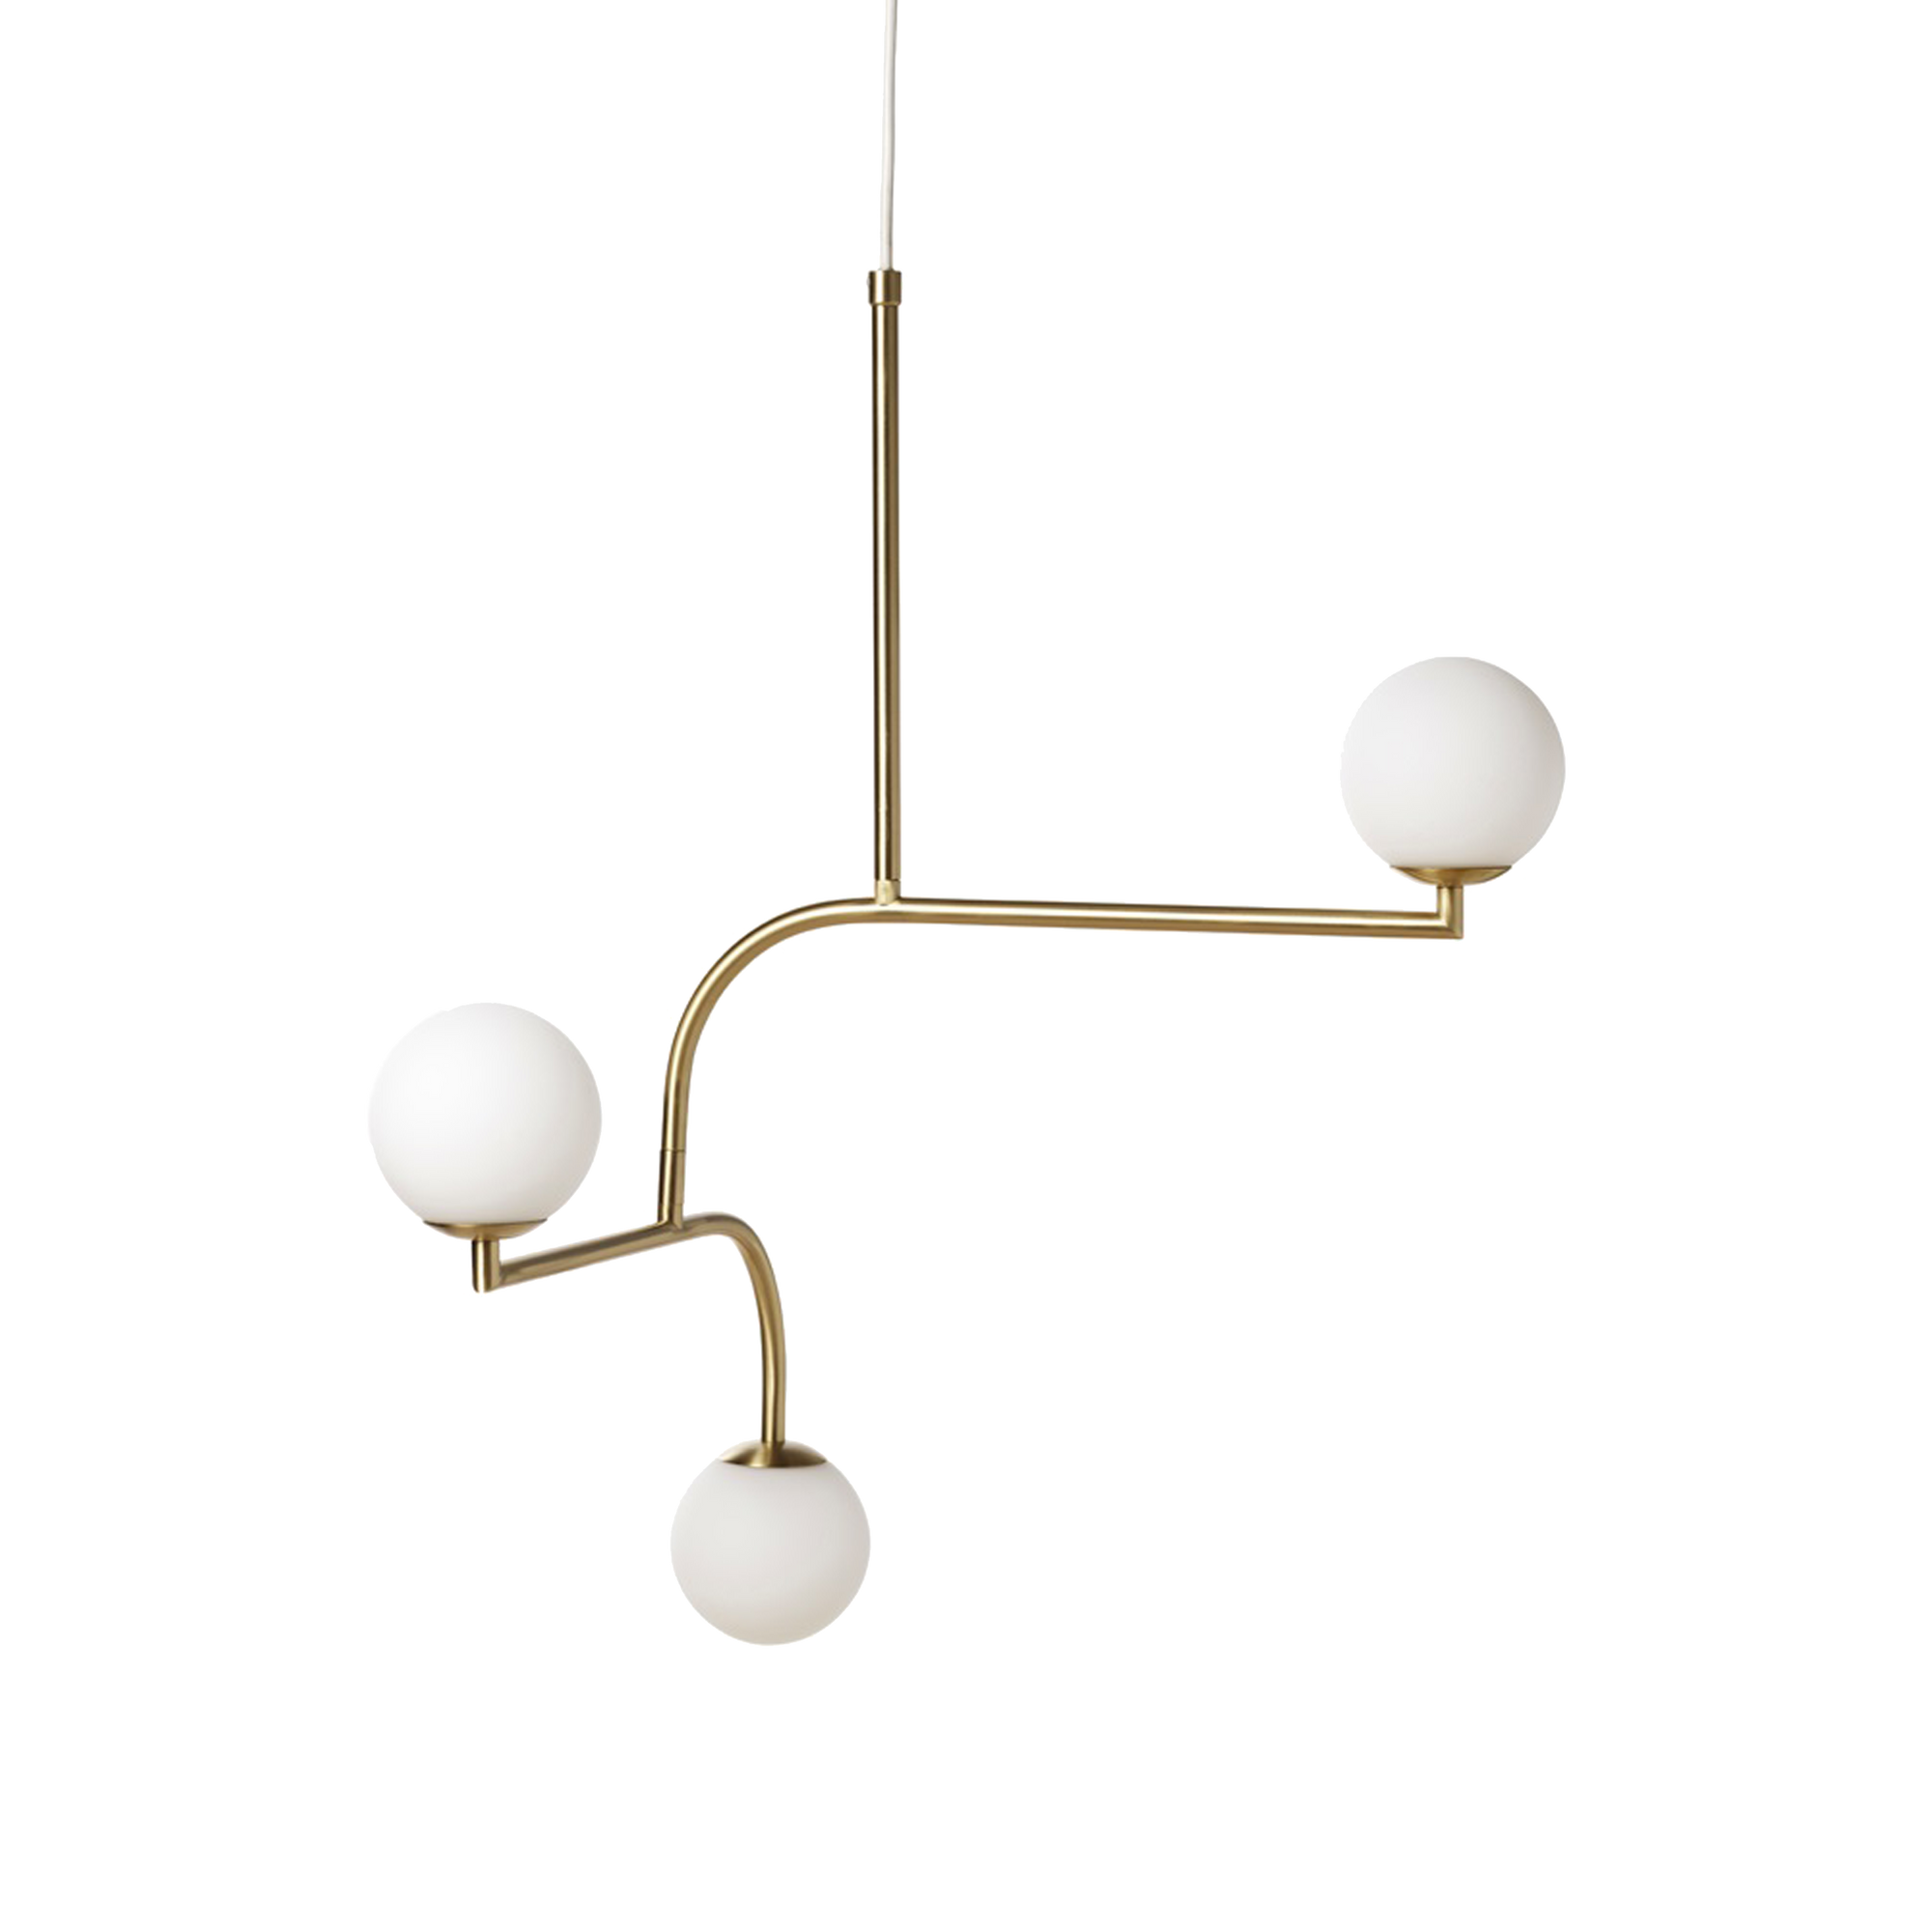 Using classic design with an urban flair the Mobile Pendant gives off royalty in any room.